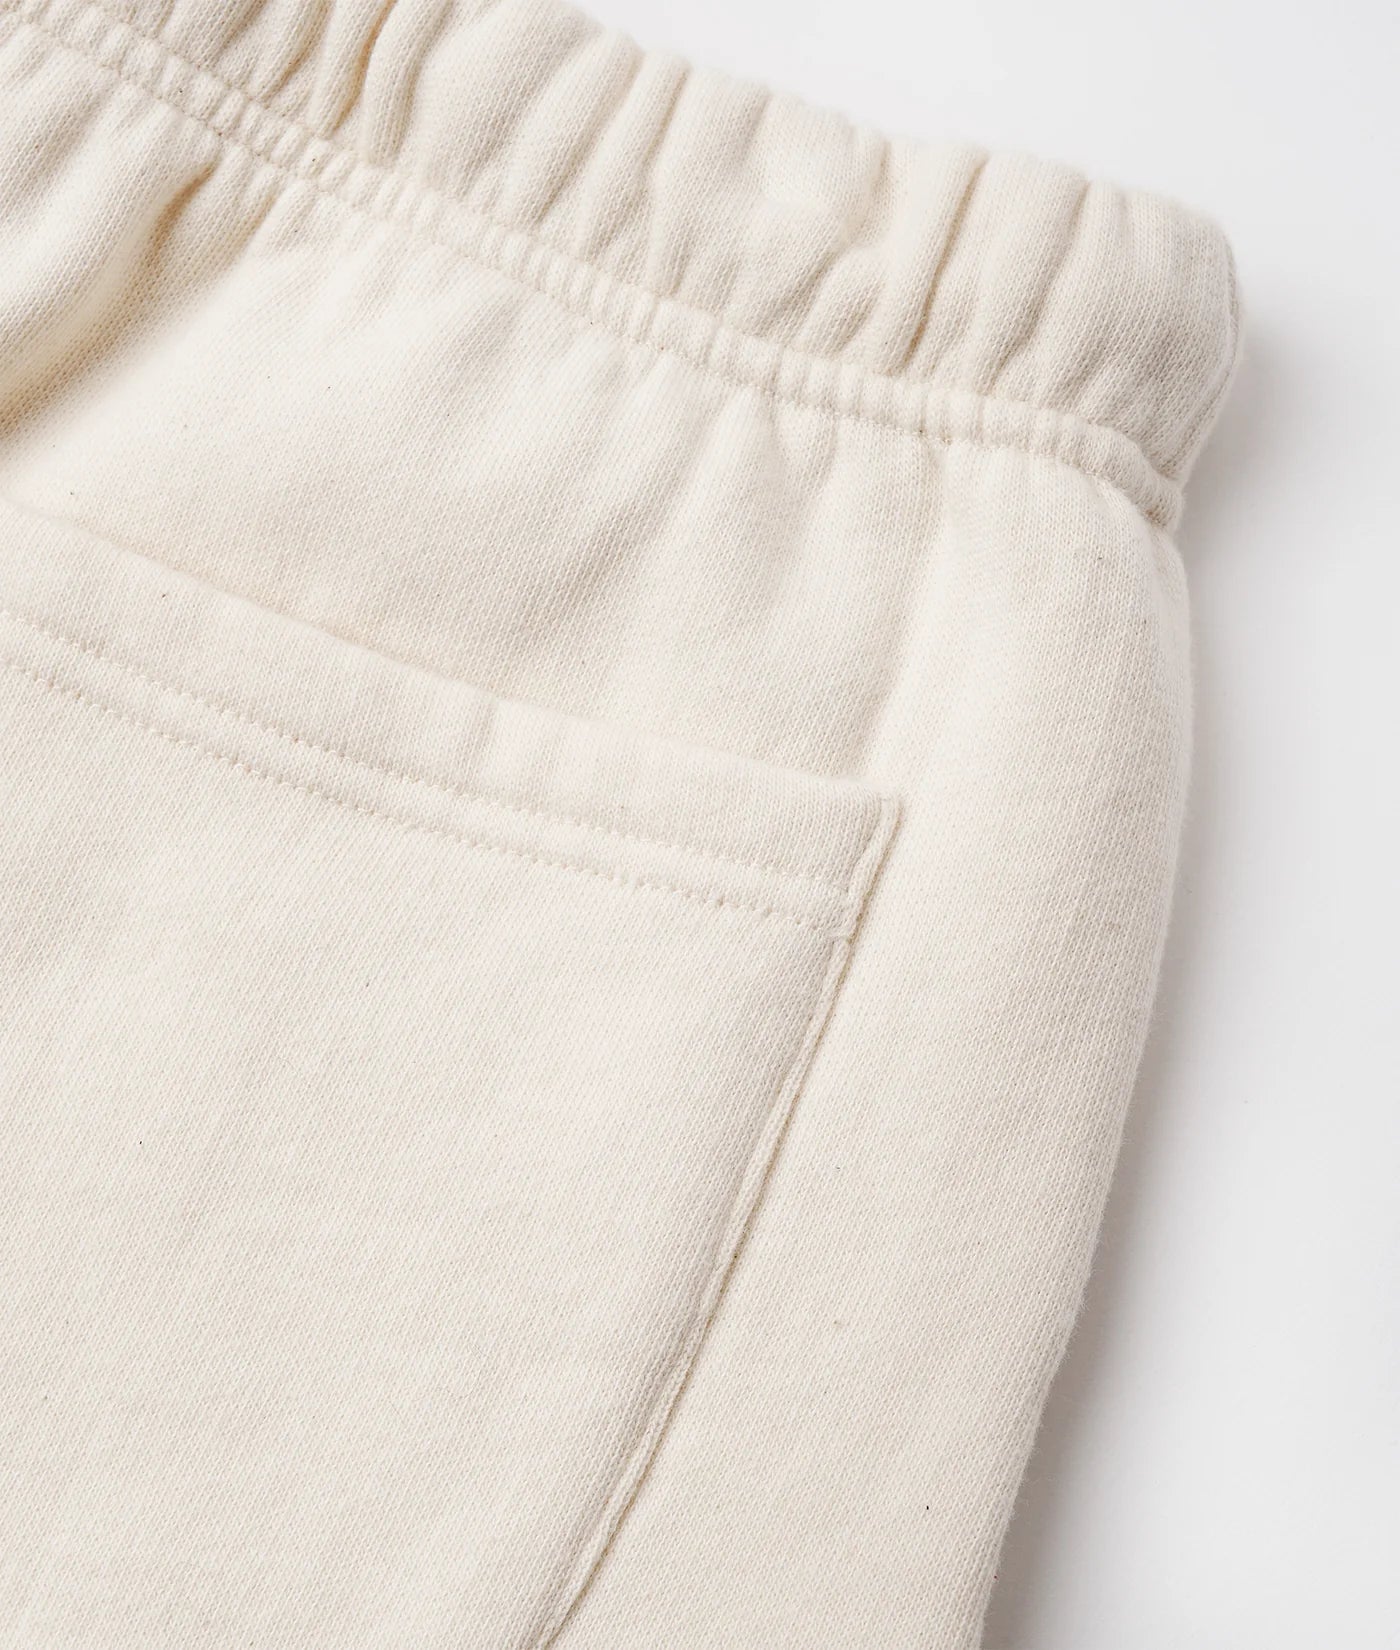 Industry of All Nations Super Sweatshorts, Undyed